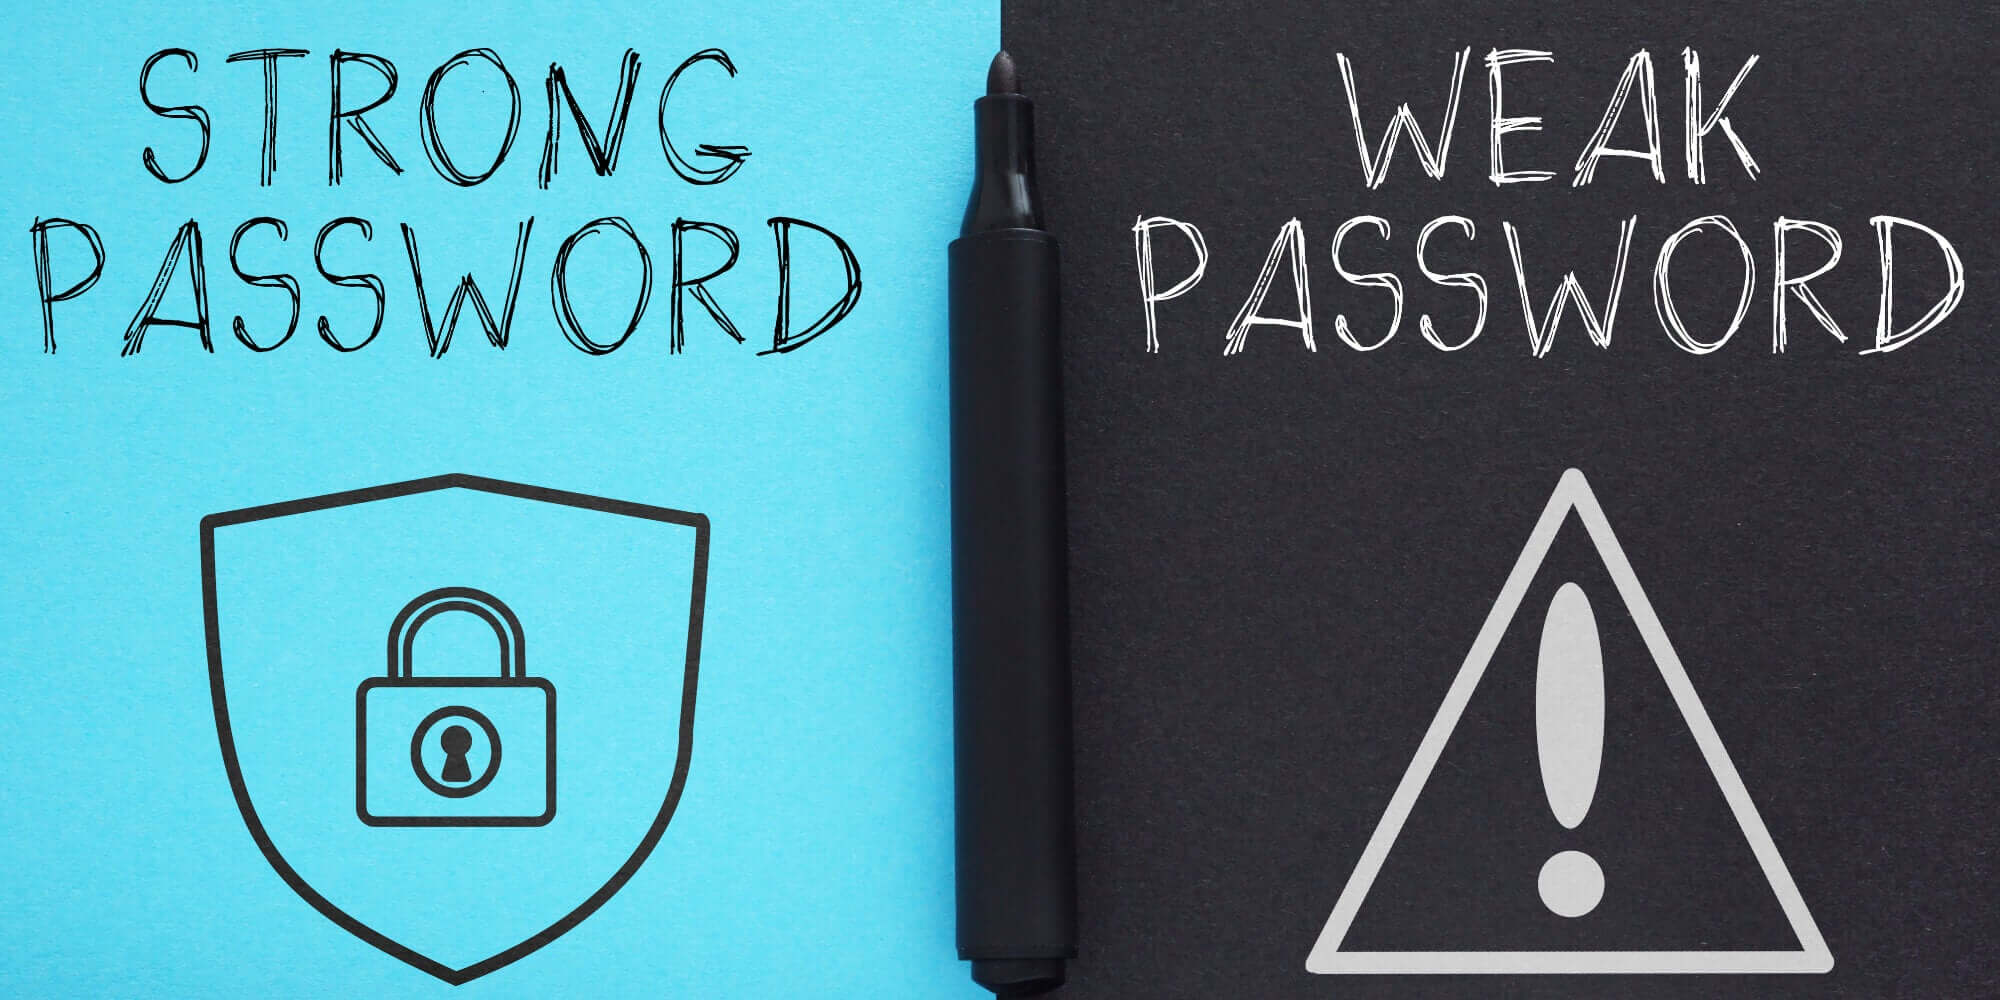 Strong and weak password banner for a password blog